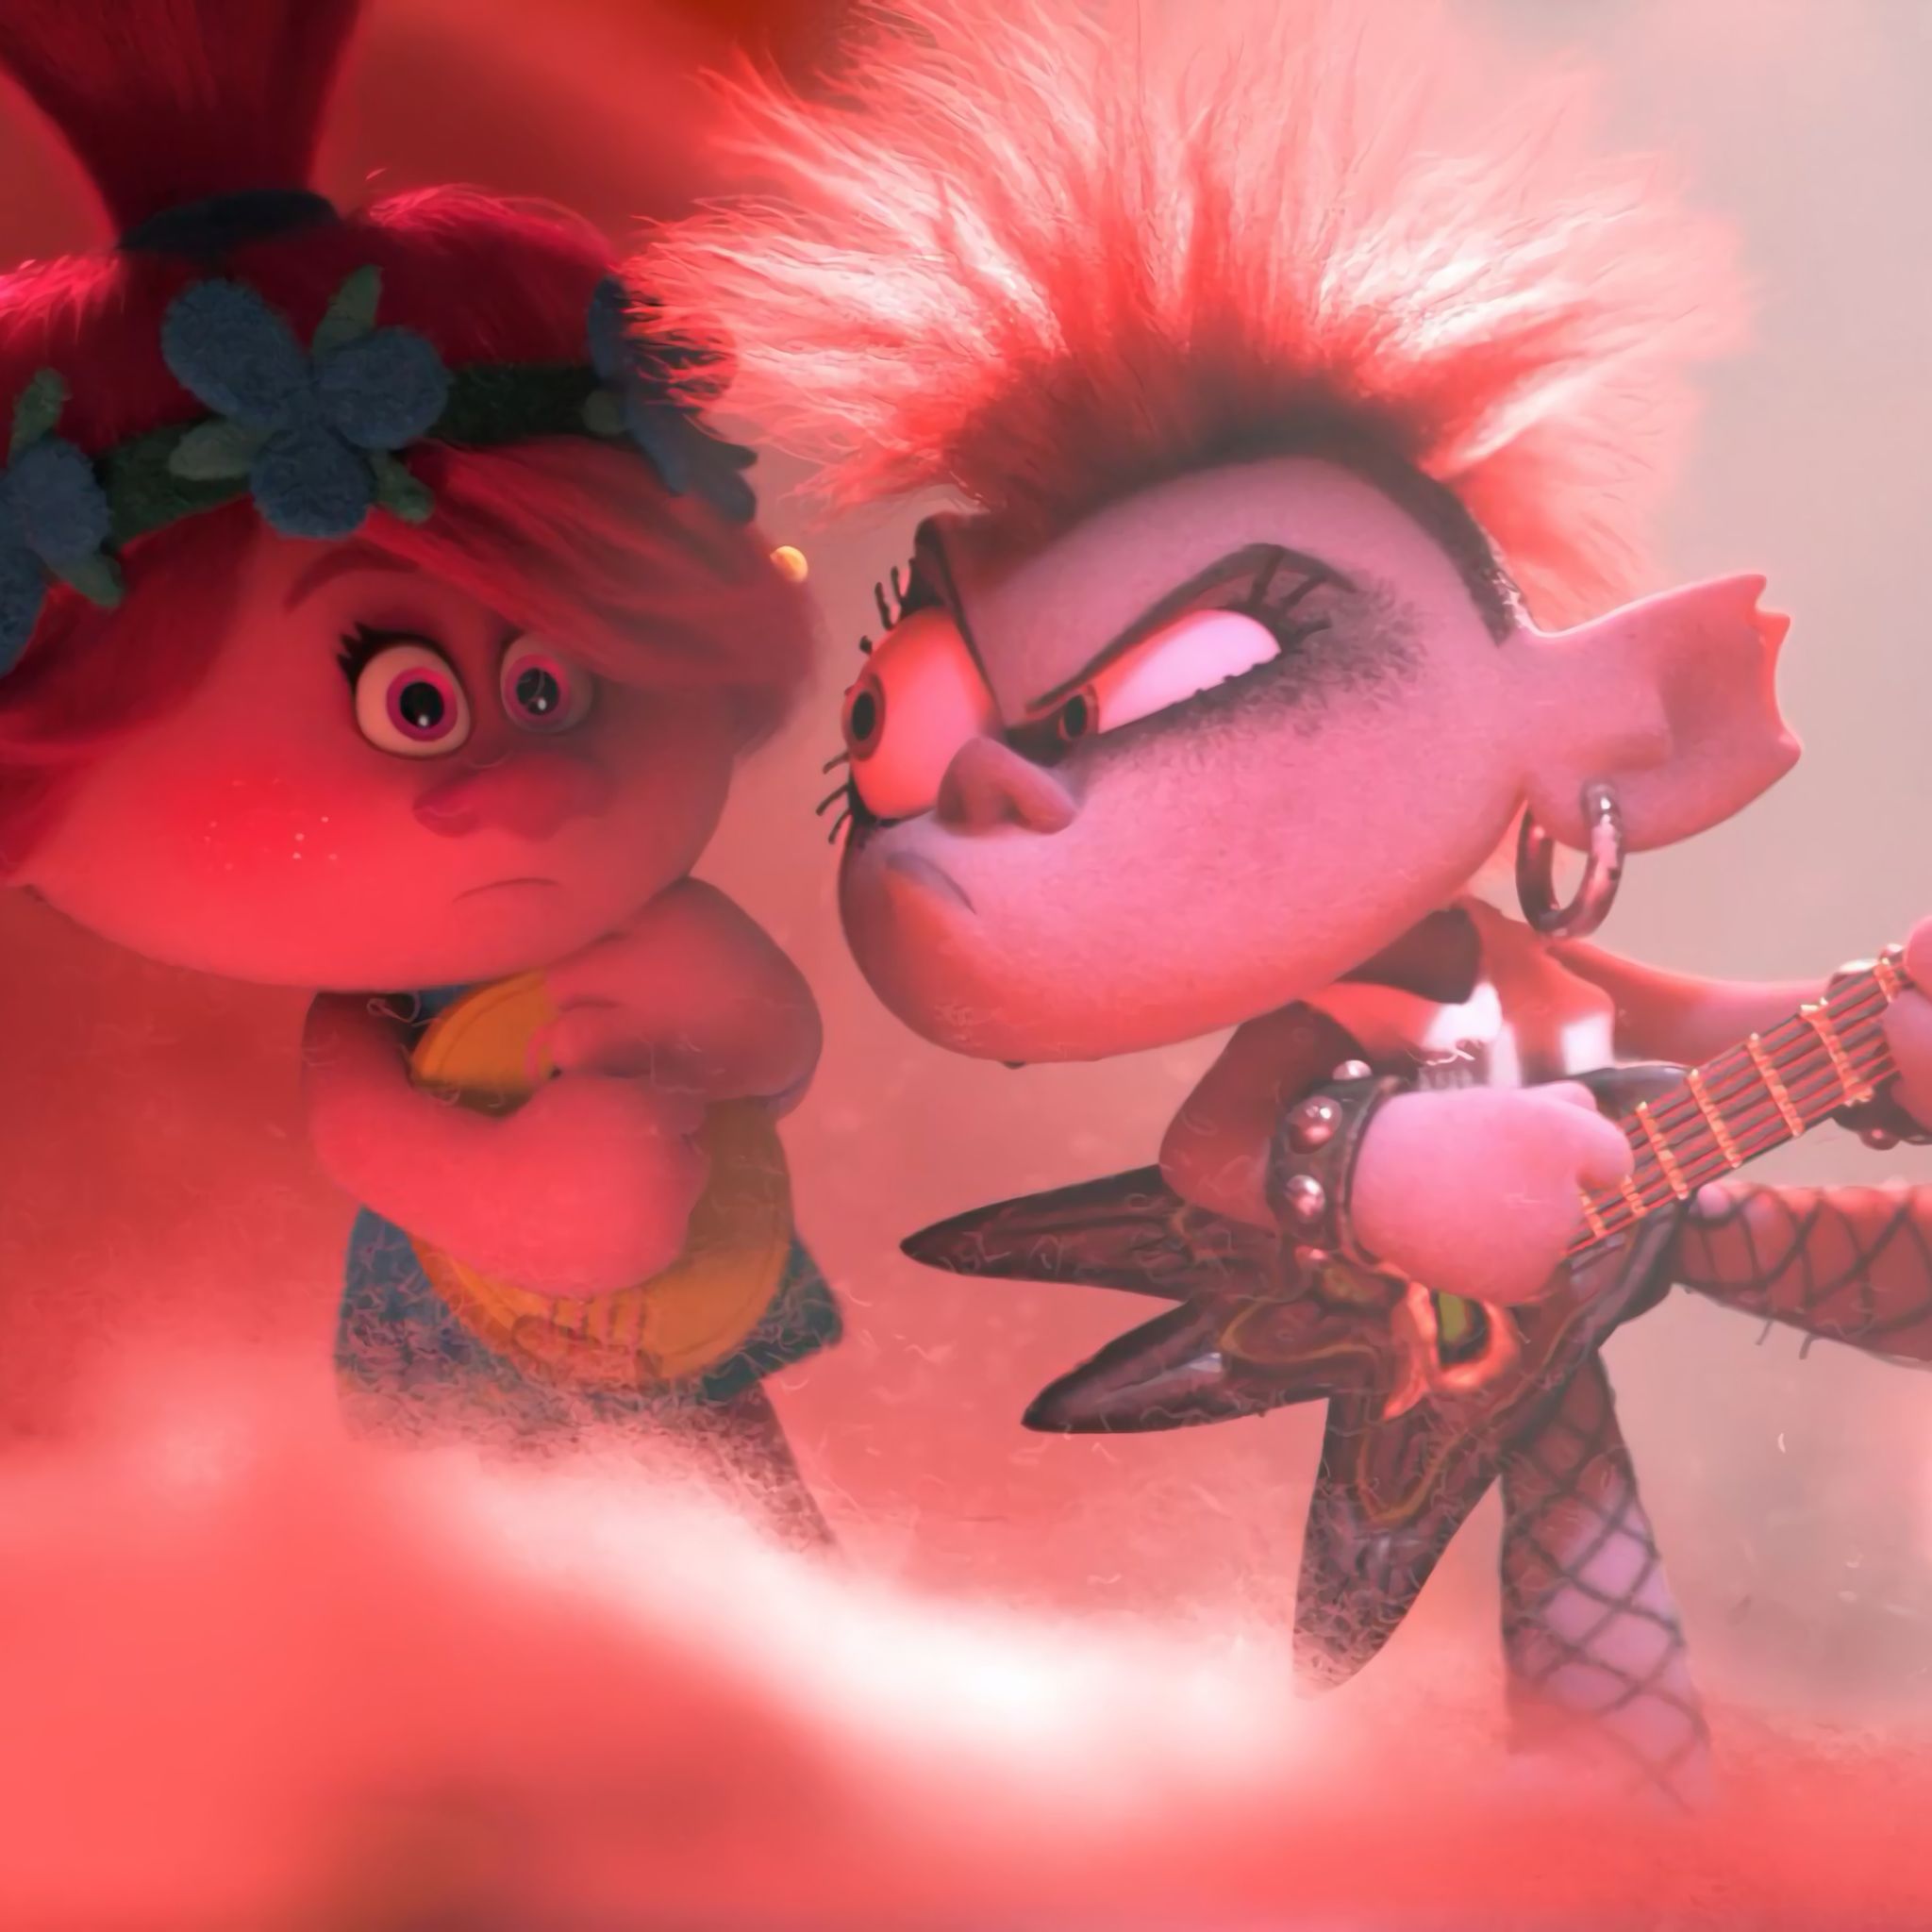 Poppy and Queen Barb In Trolls World Tour iPad Air